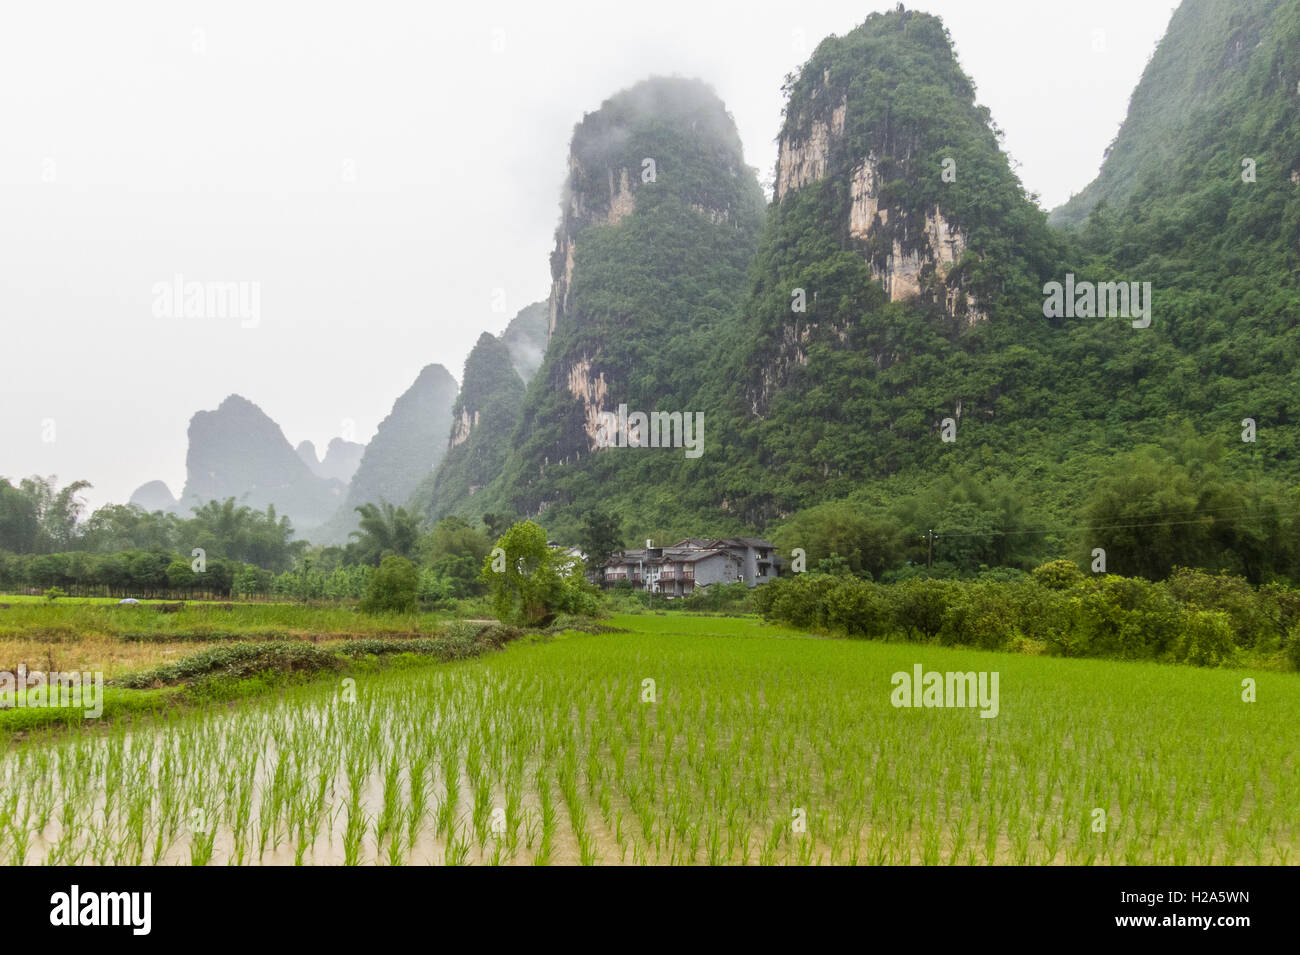 Rice paddy field at the bottom of karst mountains on foggy day in Guilin, China Stock Photo